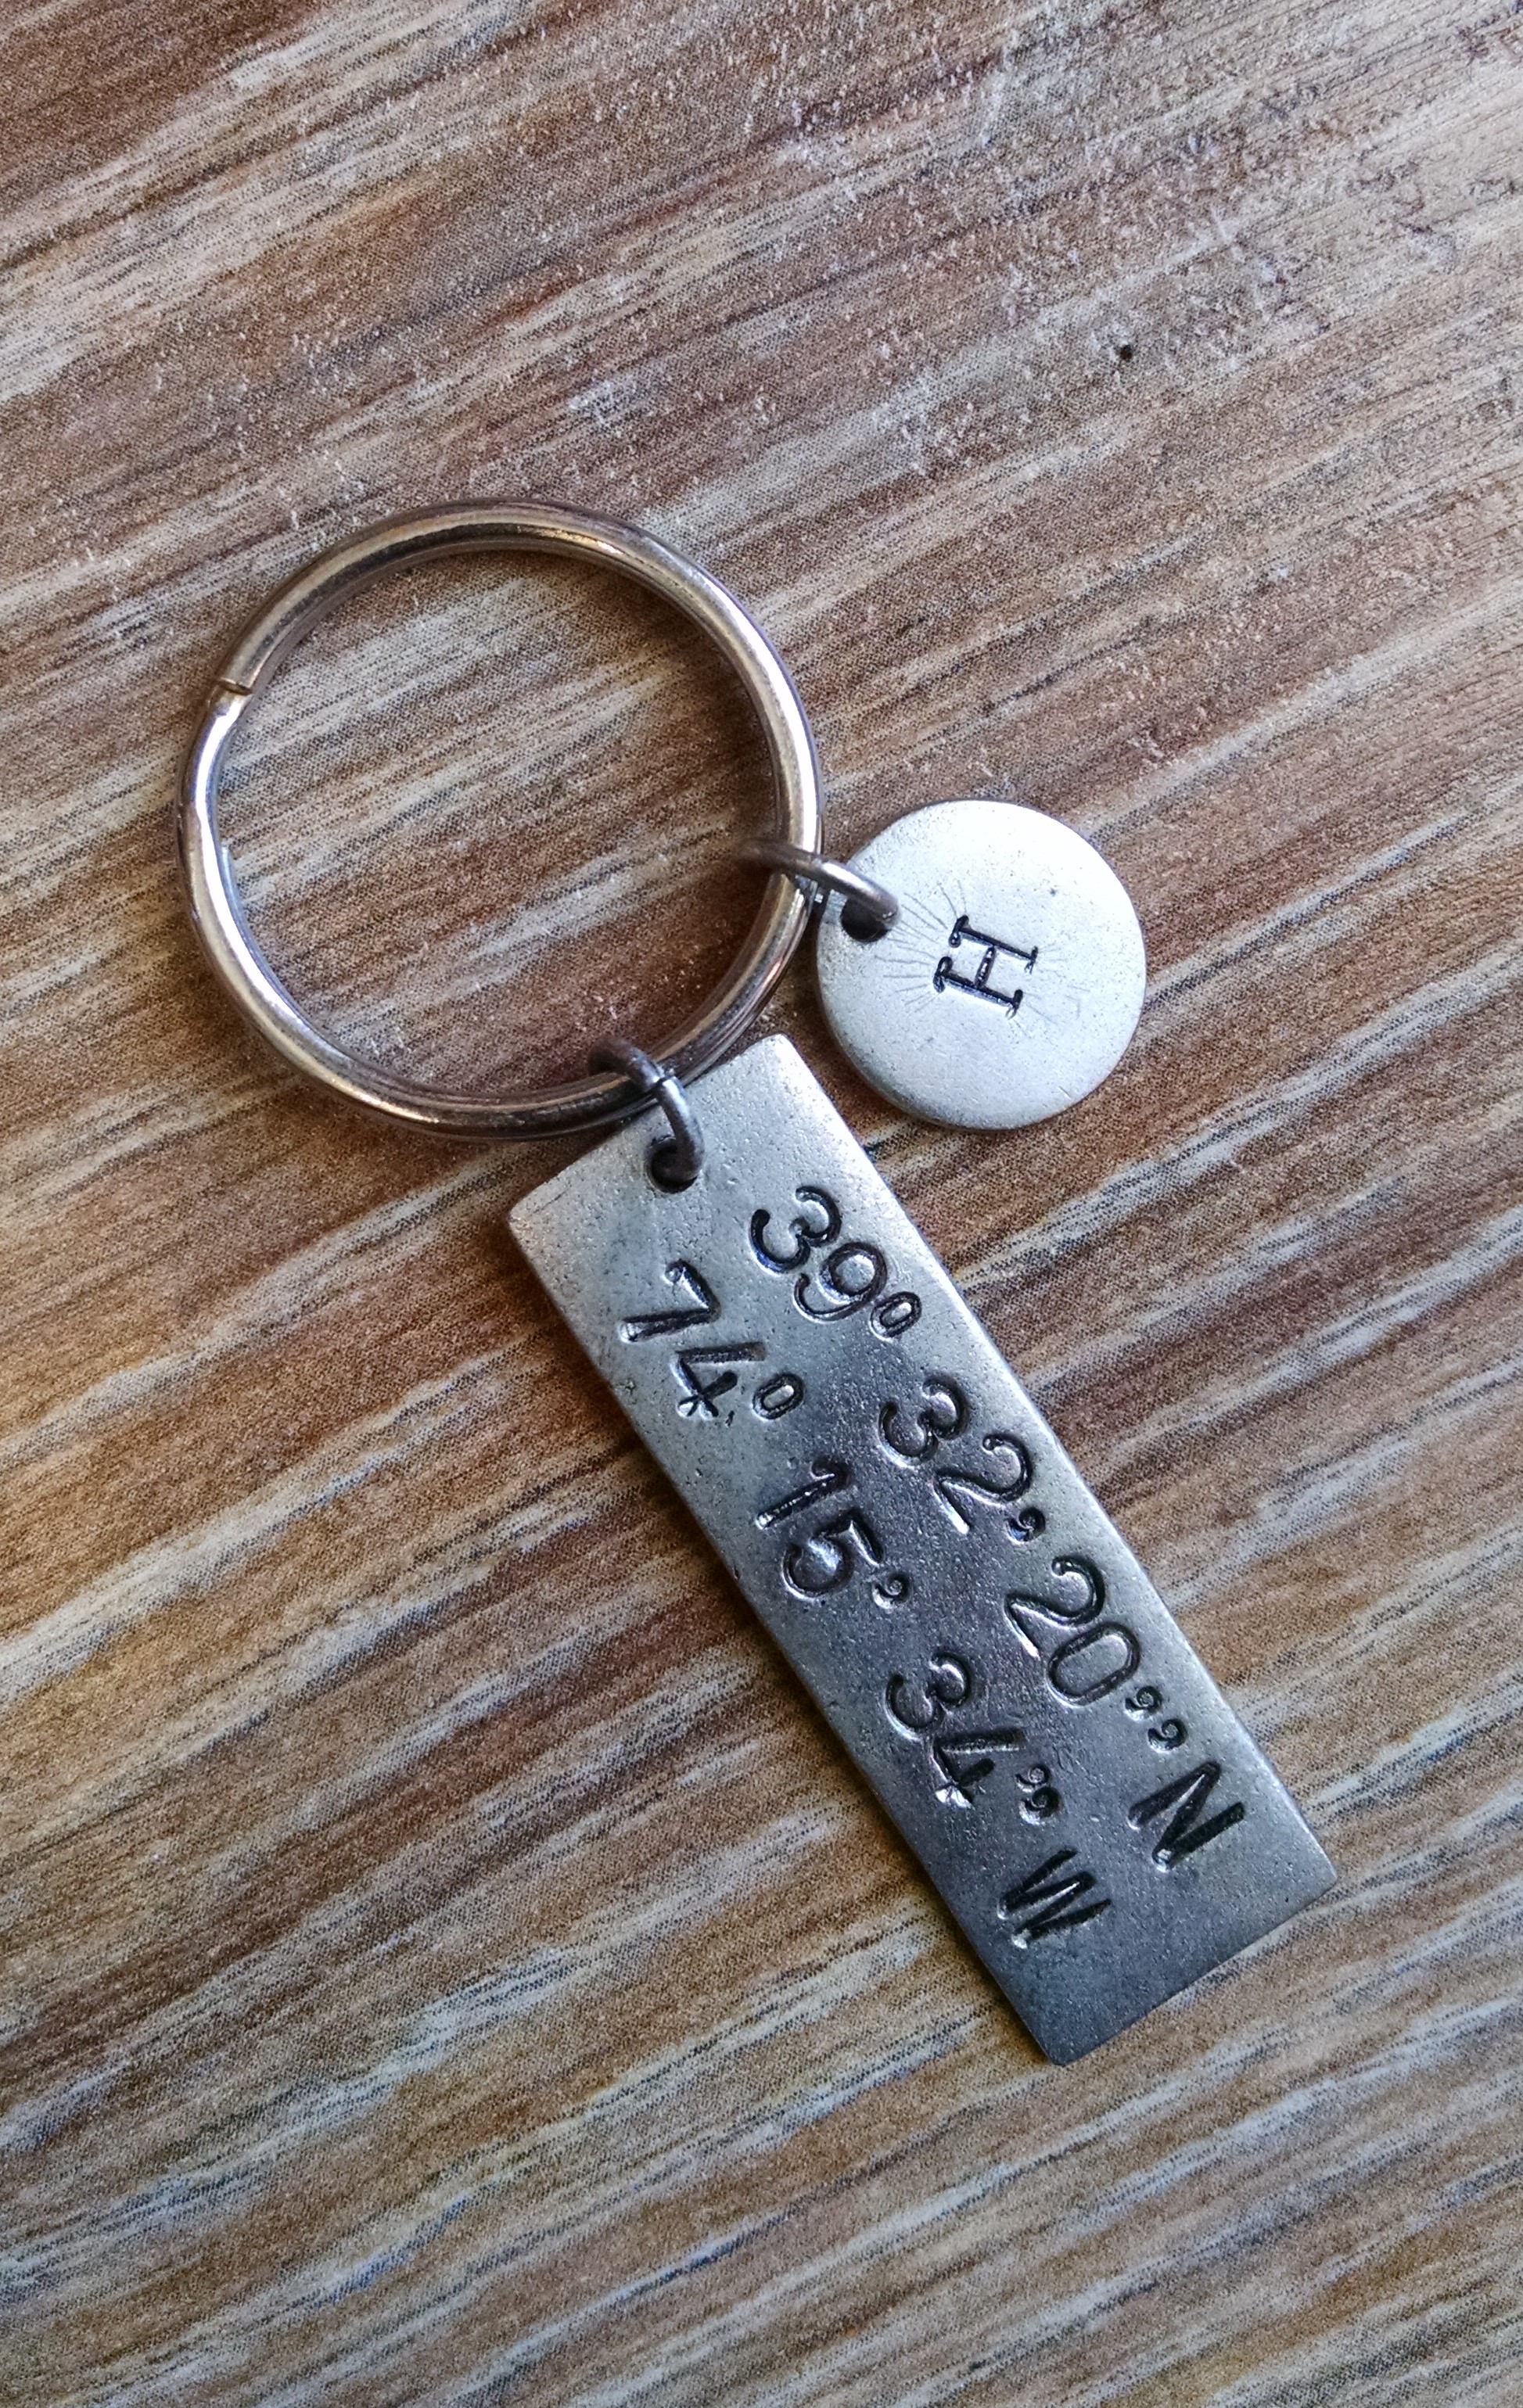 https://justbeadit.net/wp-content/uploads/2016/11/coordinates-with-town-initials-keychain.jpg